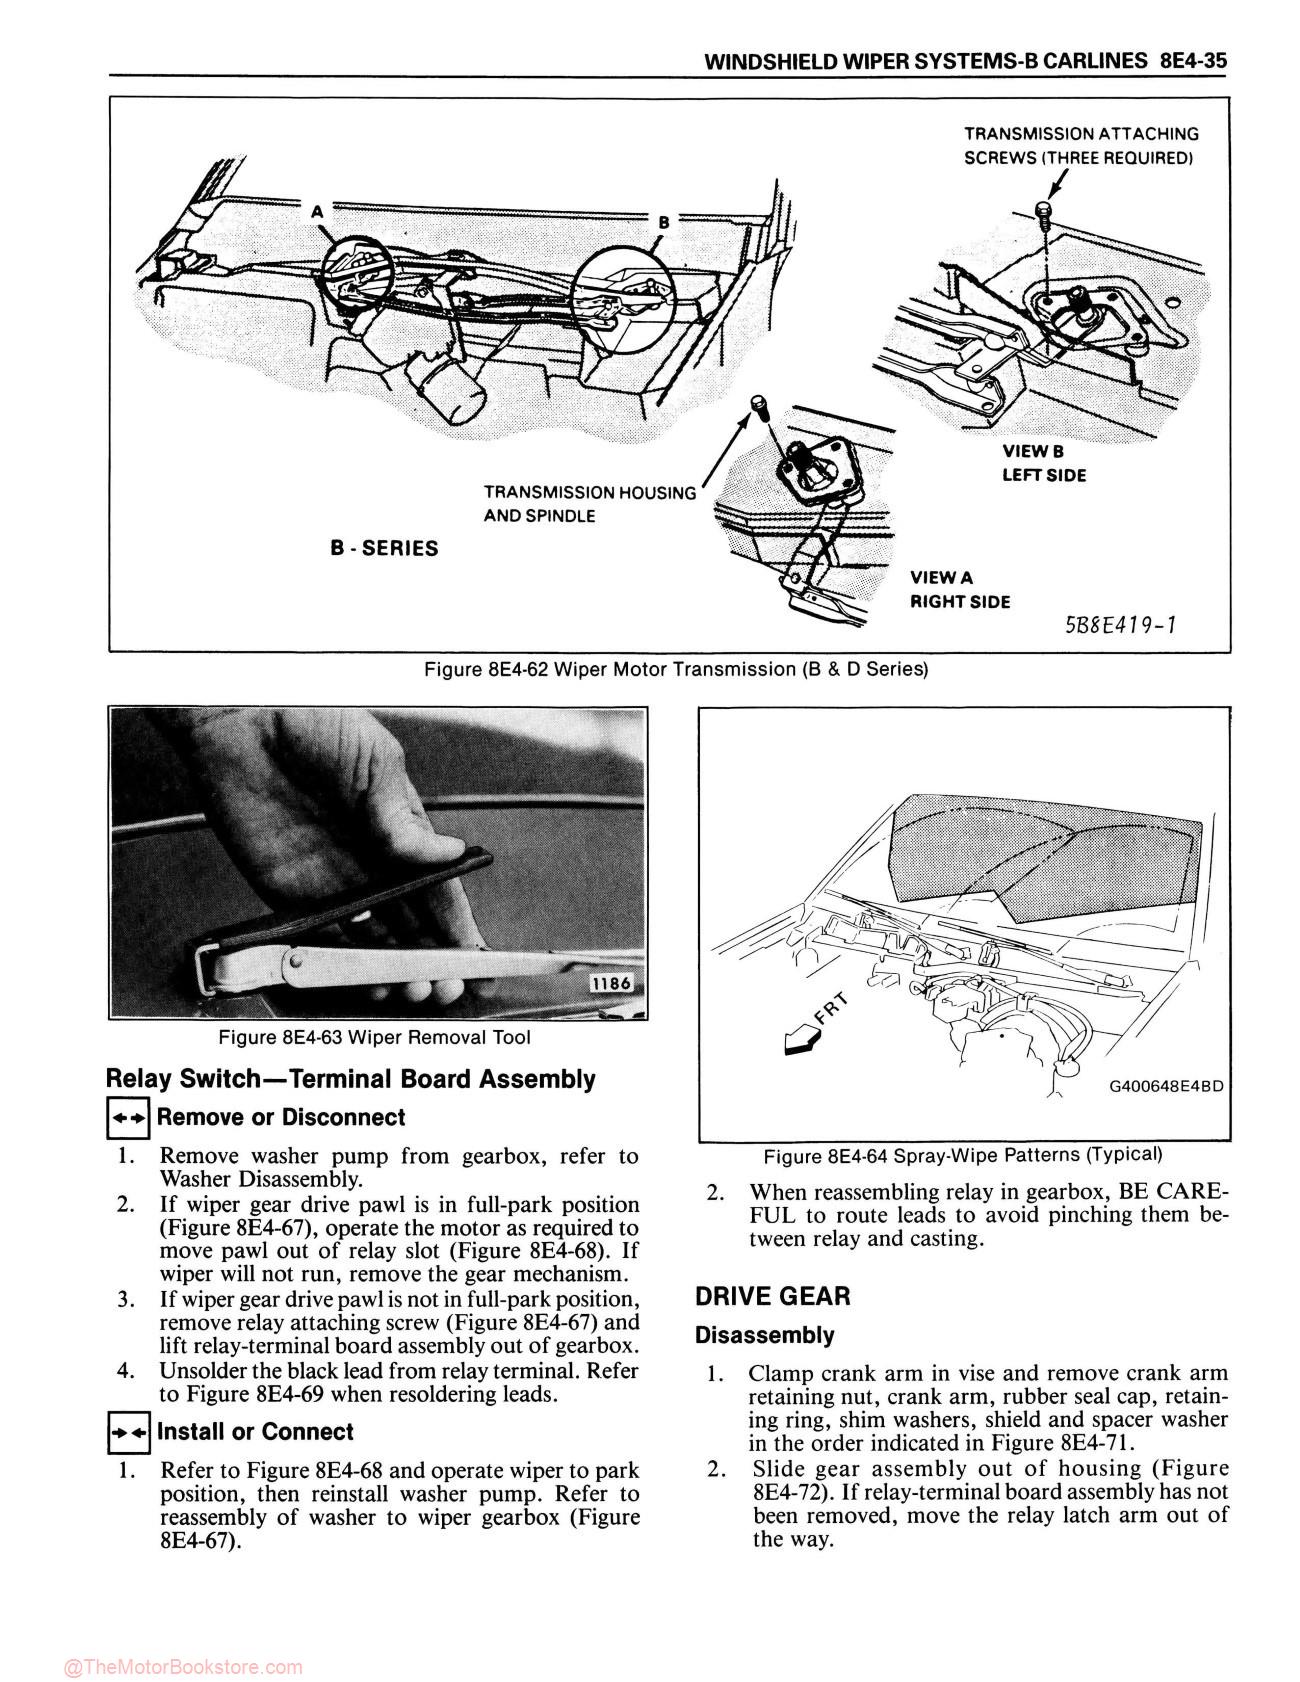 1986 Buick and Grand National Service Manual - Sample Page 5